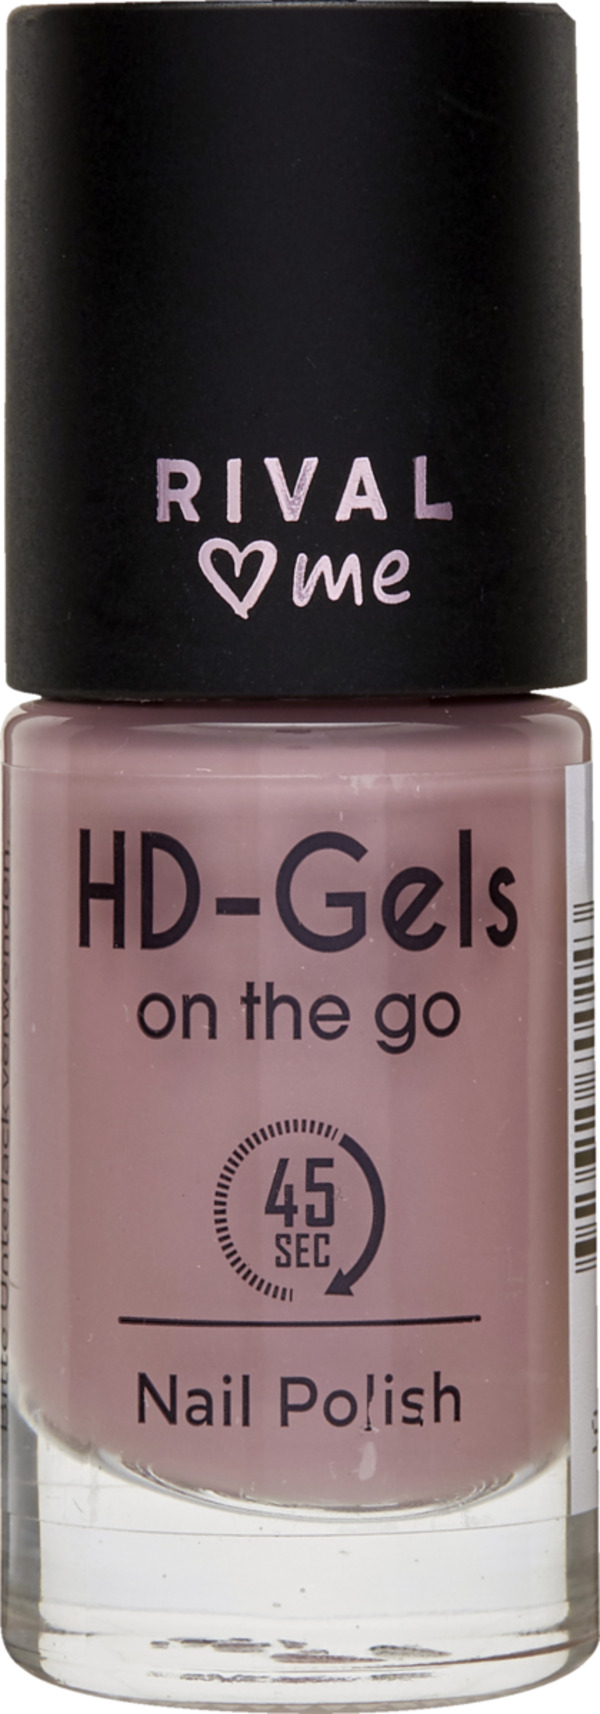 Bild 1 von RIVAL loves me HD-Gels on the go 11 squad